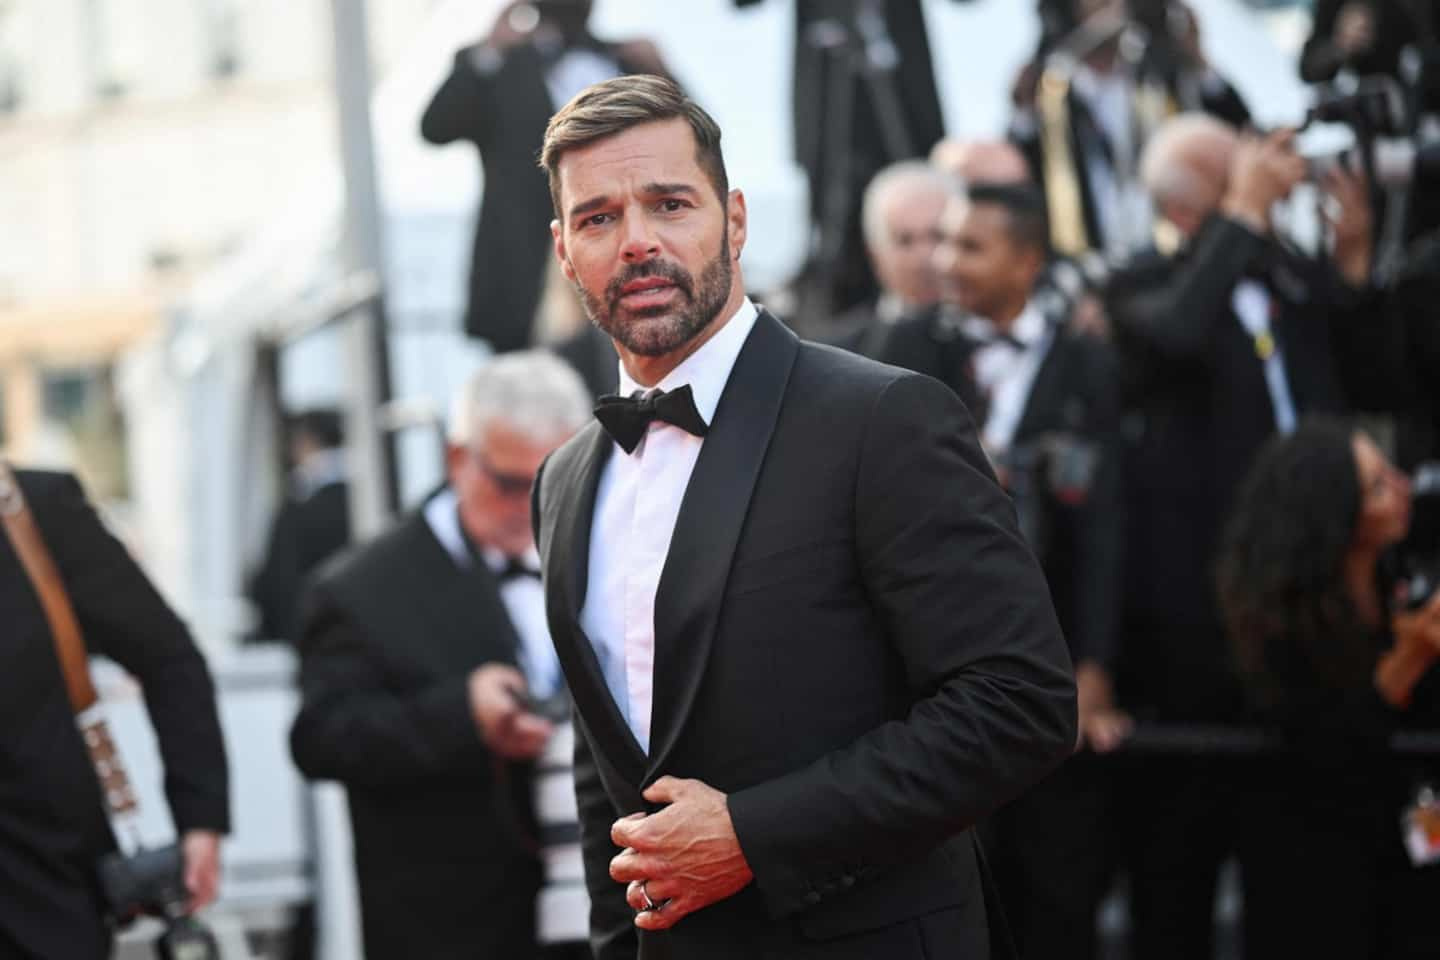 Accused of domestic violence and incest, Ricky Martin faces 50 years in prison